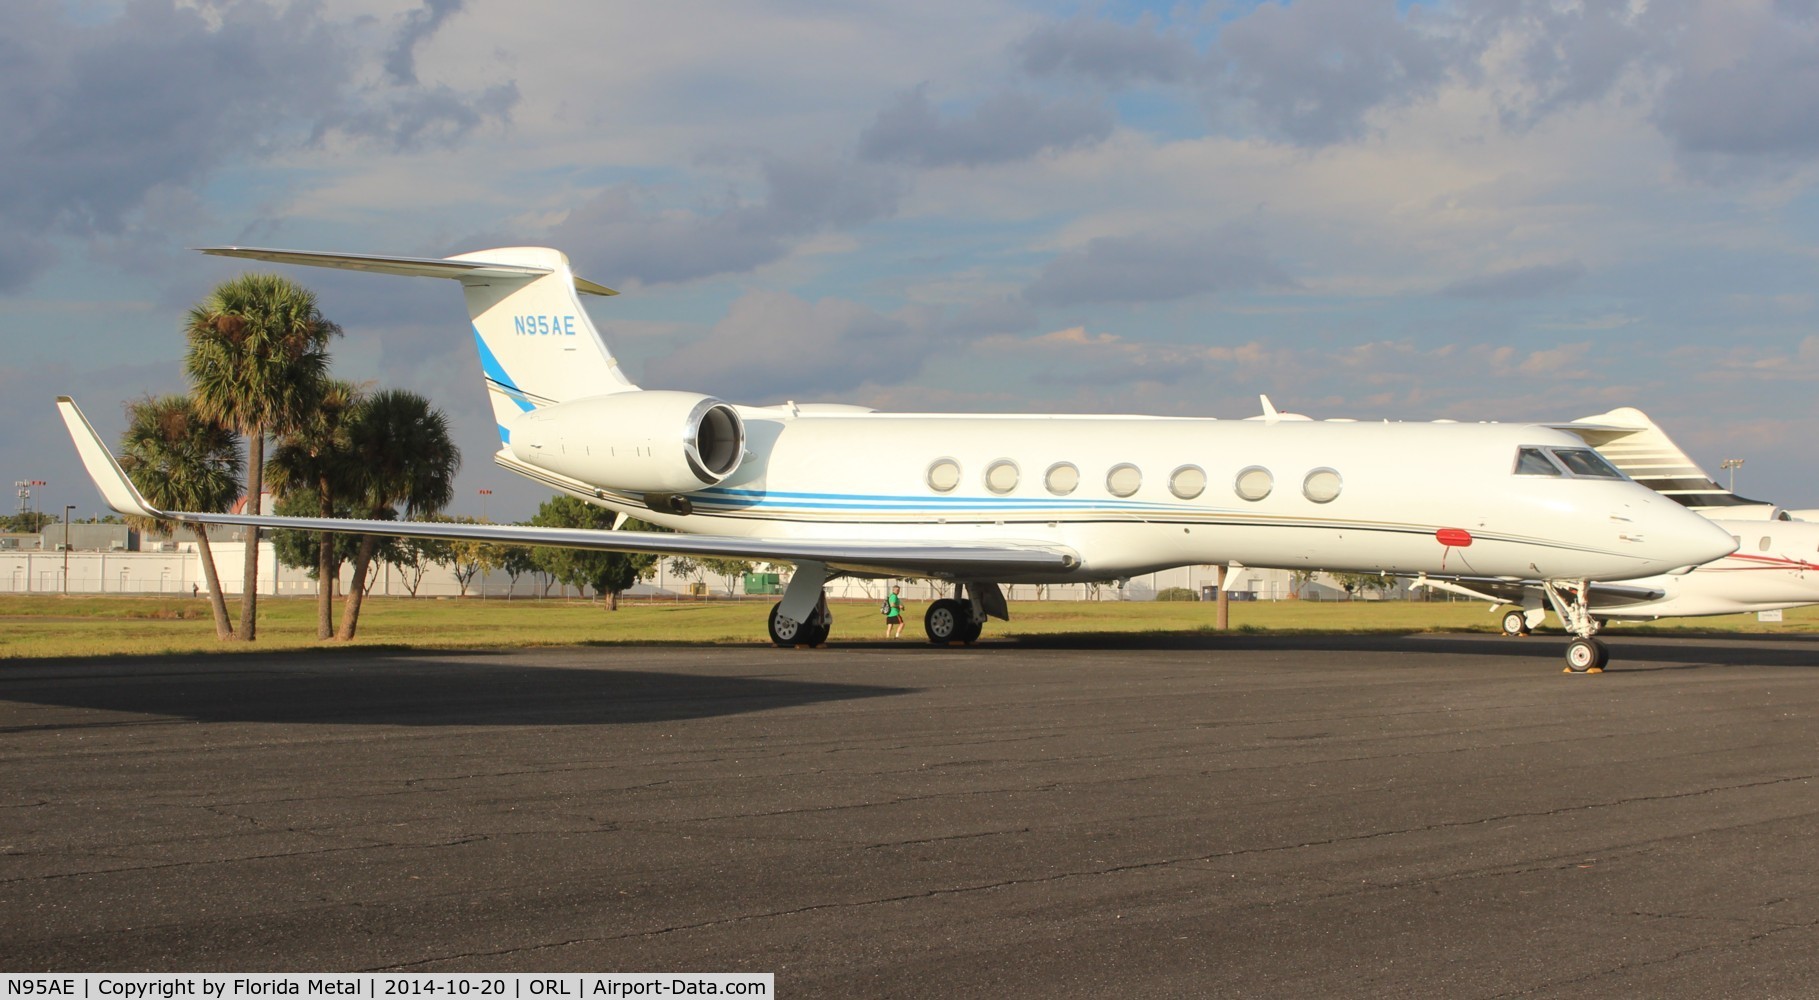 N95AE, 1998 Gulfstream Aerospace G-V C/N 562, This is a 1998 built Gulfstream V with 7 windows on the side like a G550, however on the port side it only has 6